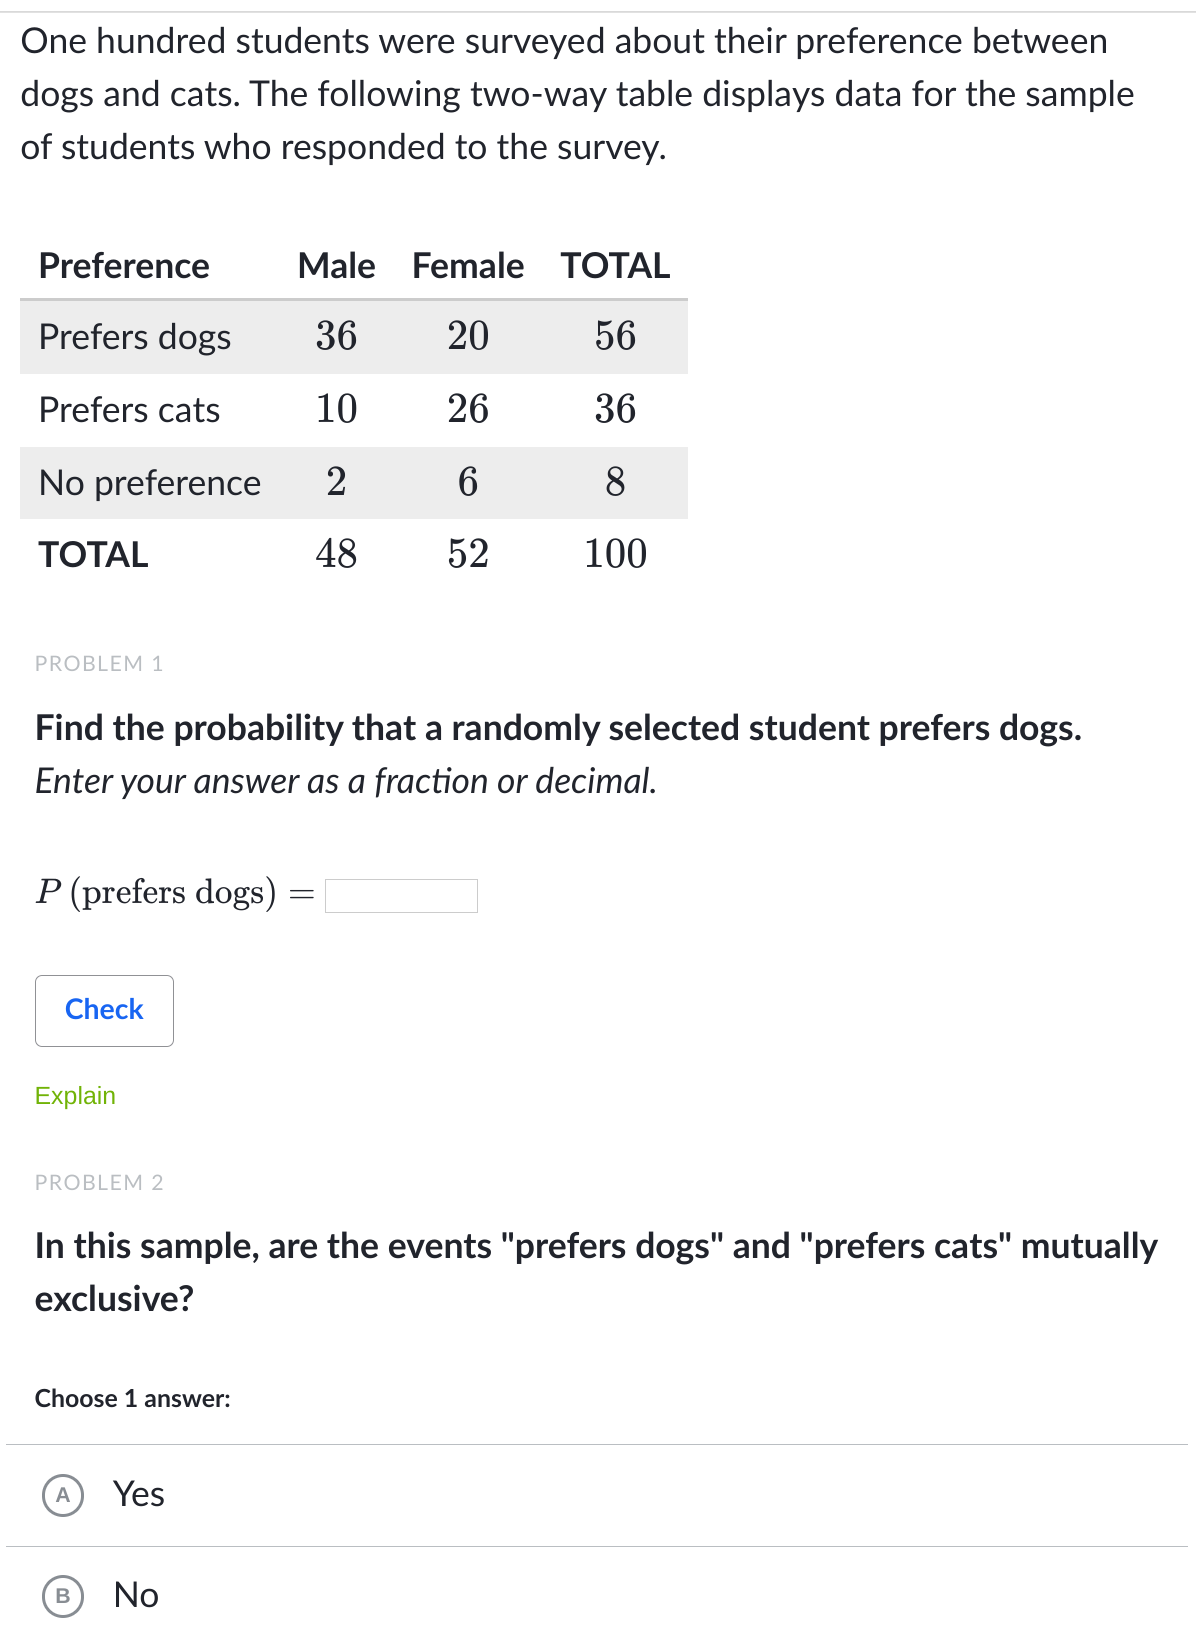 One hundred students were surveyed about their preference between
dogs and cats. The following two-way table displays data for the sample
of students who responded to the survey.
Preference
Male
Female TOTAL
Prefers dogs
36
20
56
Prefers cats
10
26
36
No preference
2
ТОTAL
48
52
100
PROBLEM 1
Find the probability that a randomly selected student prefers dogs.
Enter your answer as a fraction or decimal.
P (prefers dogs)
Check
Explain
PROBLEM 2
In this sample, are the events "prefers dogs" and "prefers cats" mutually
exclusive?
Choose 1 answer:
A
Yes
No
